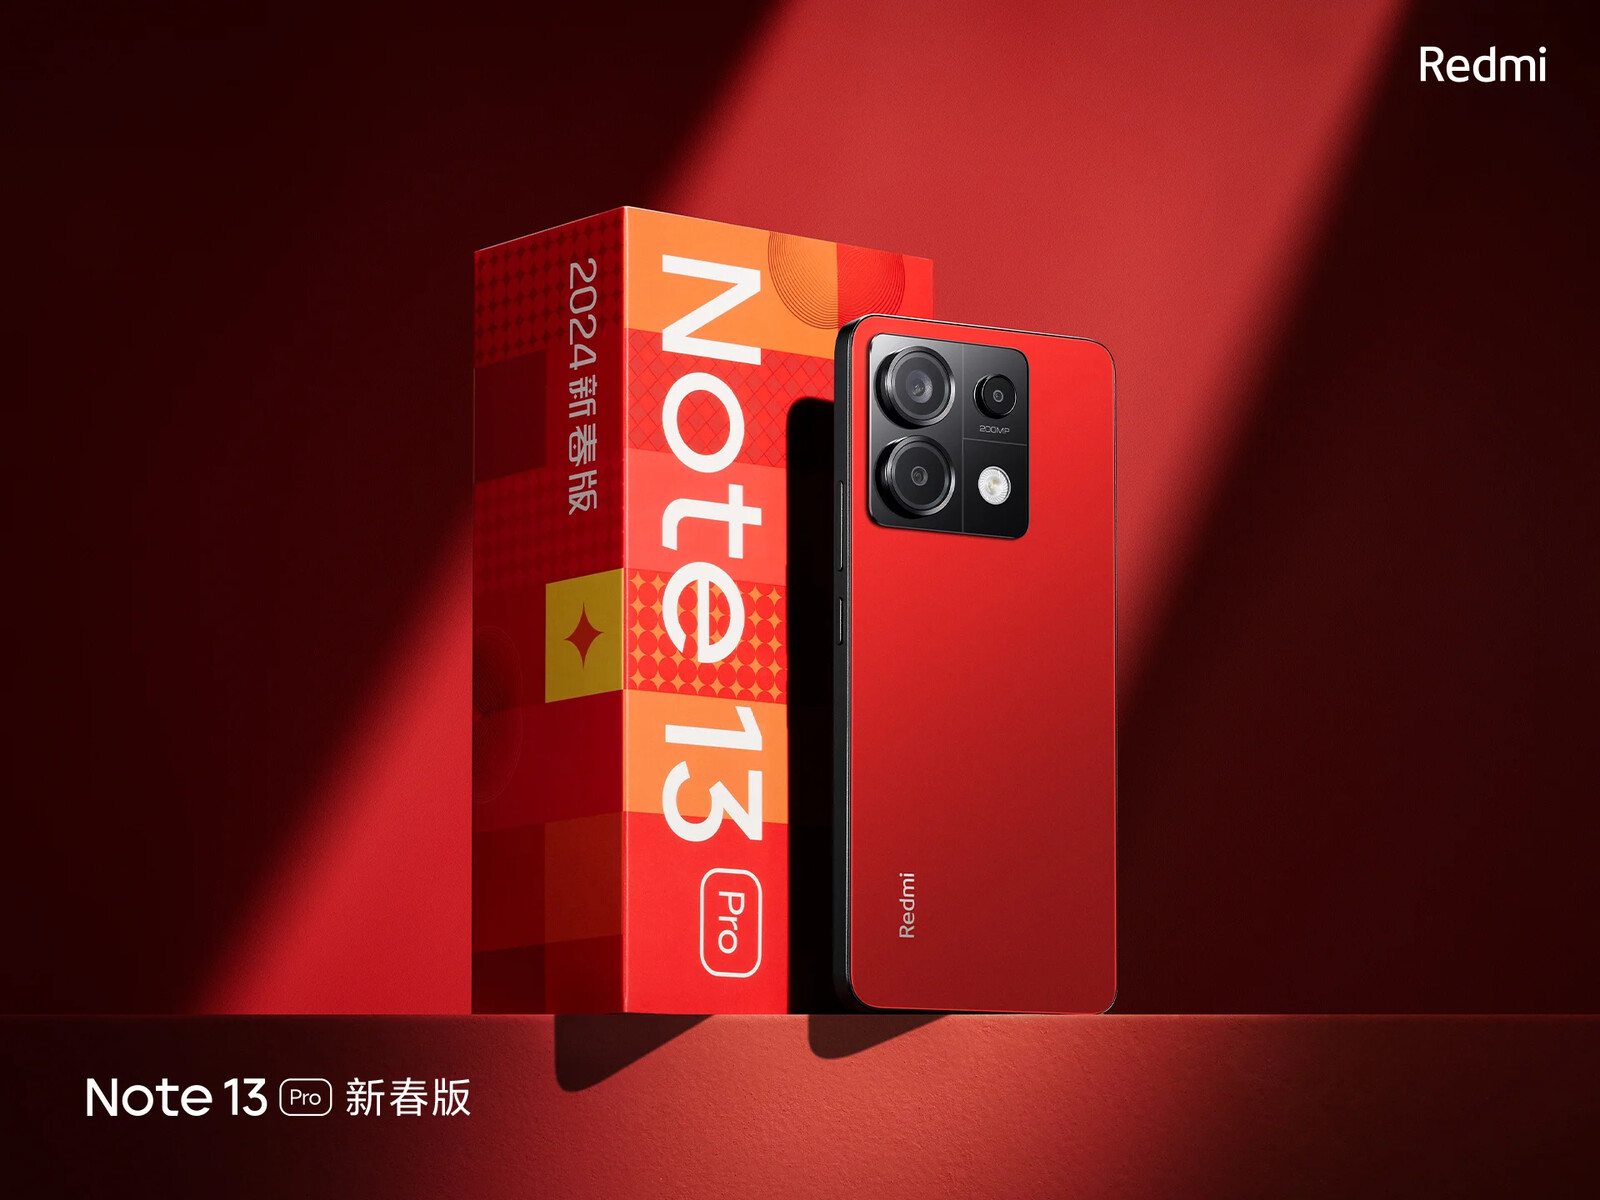 Xiaomi Redmi Note 13 Pro 5G refresh arrives with eye-catching